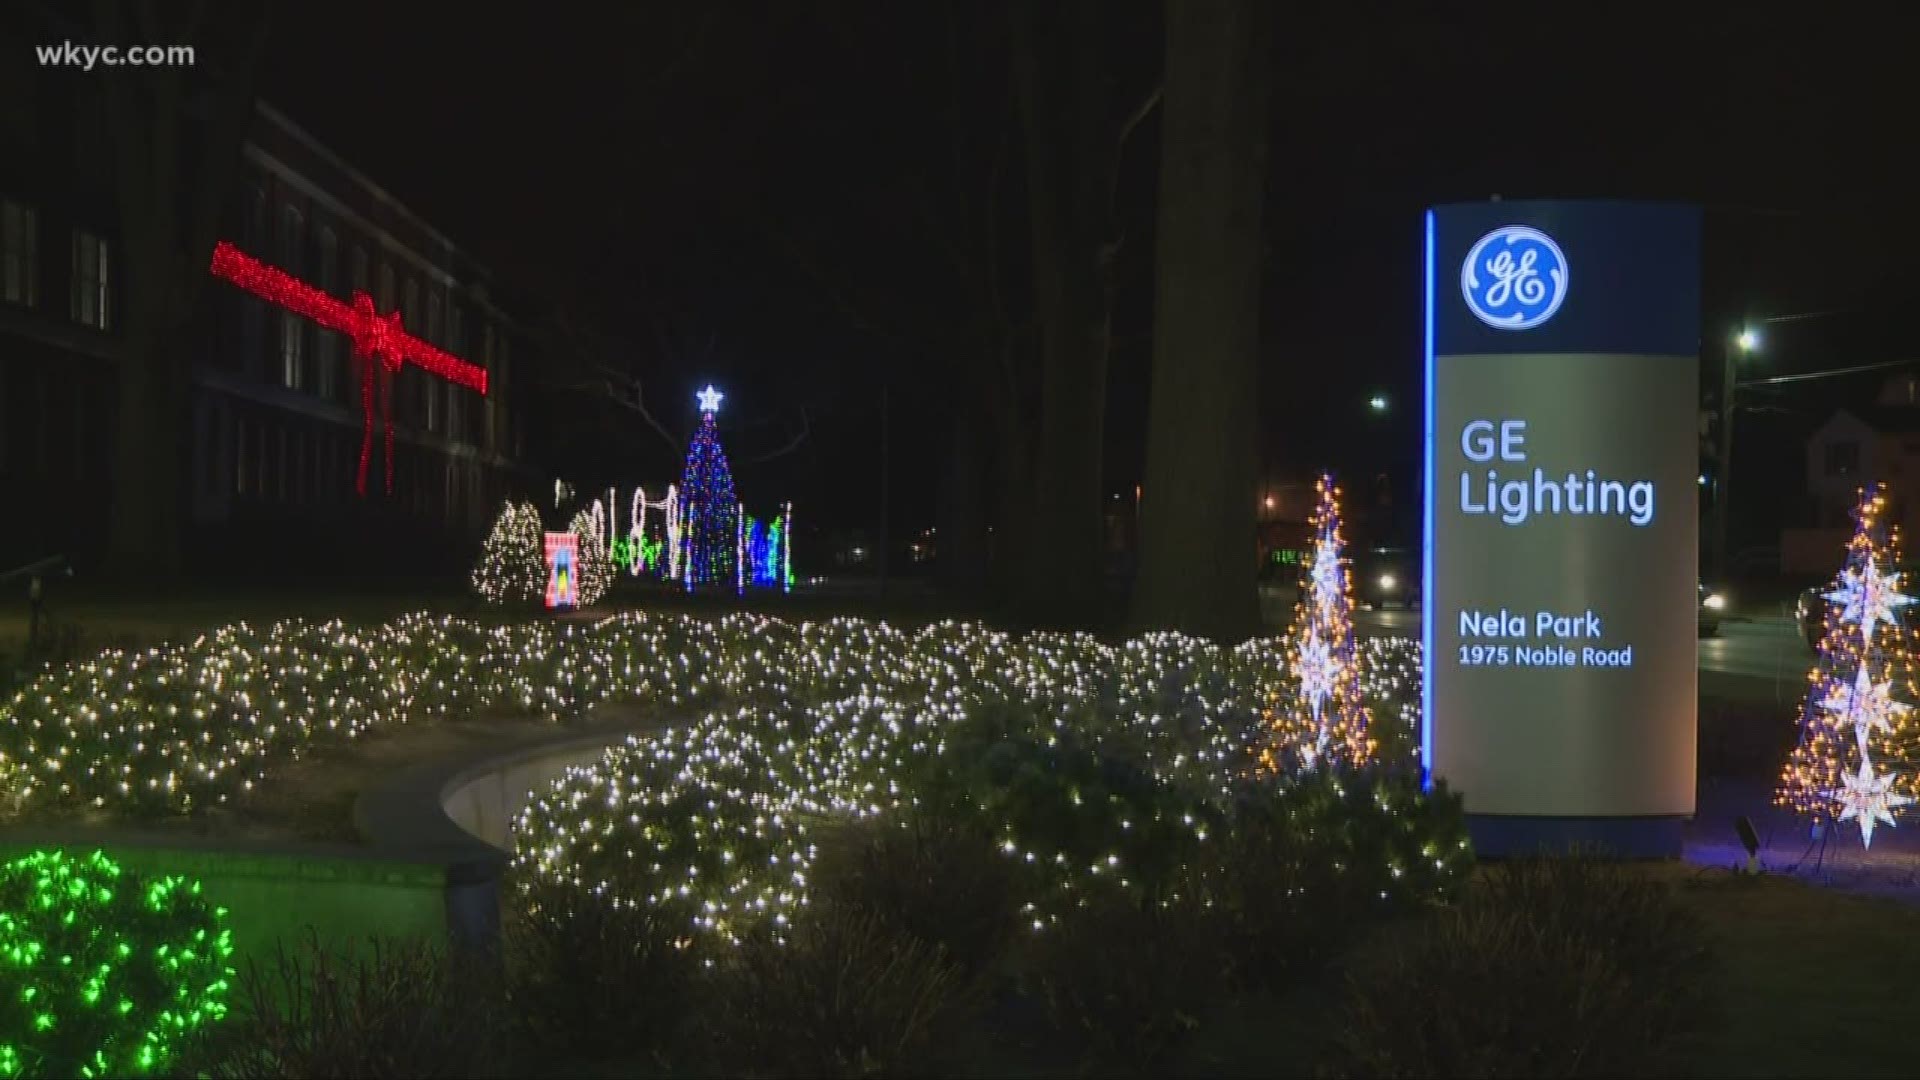 This is the 95th year that GE has helped make holiday memories for so many NE Ohio families by lighting up Christmas displays along Noble Road. Betsy Kling reports.